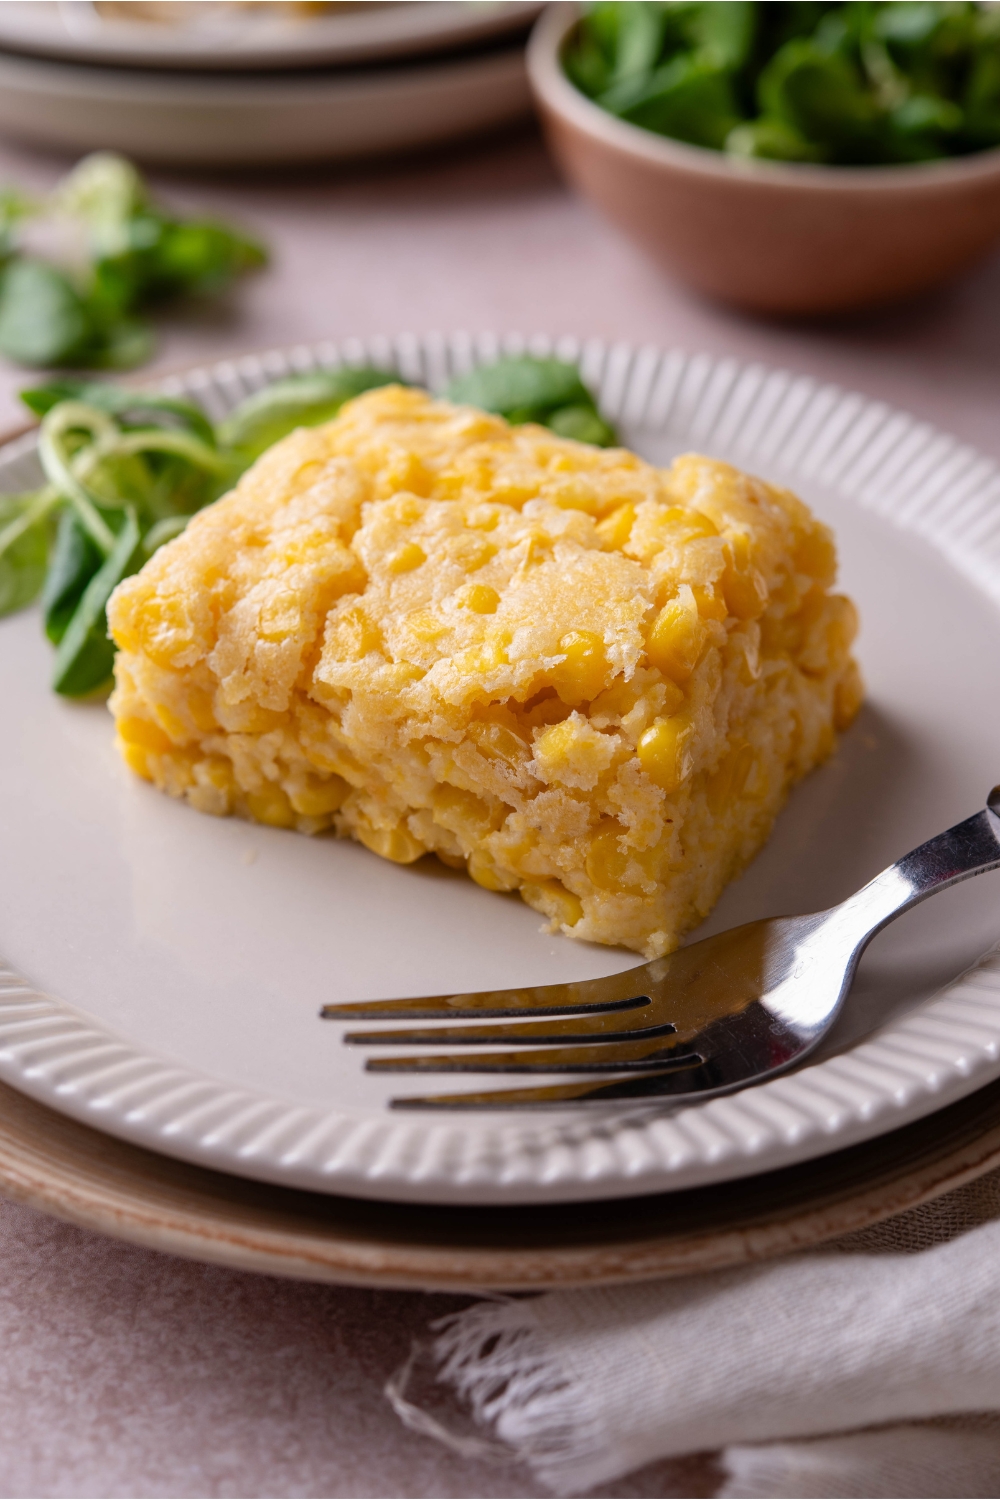 A square of corn casserole with a fork and a pile of fresh greens on the plate.